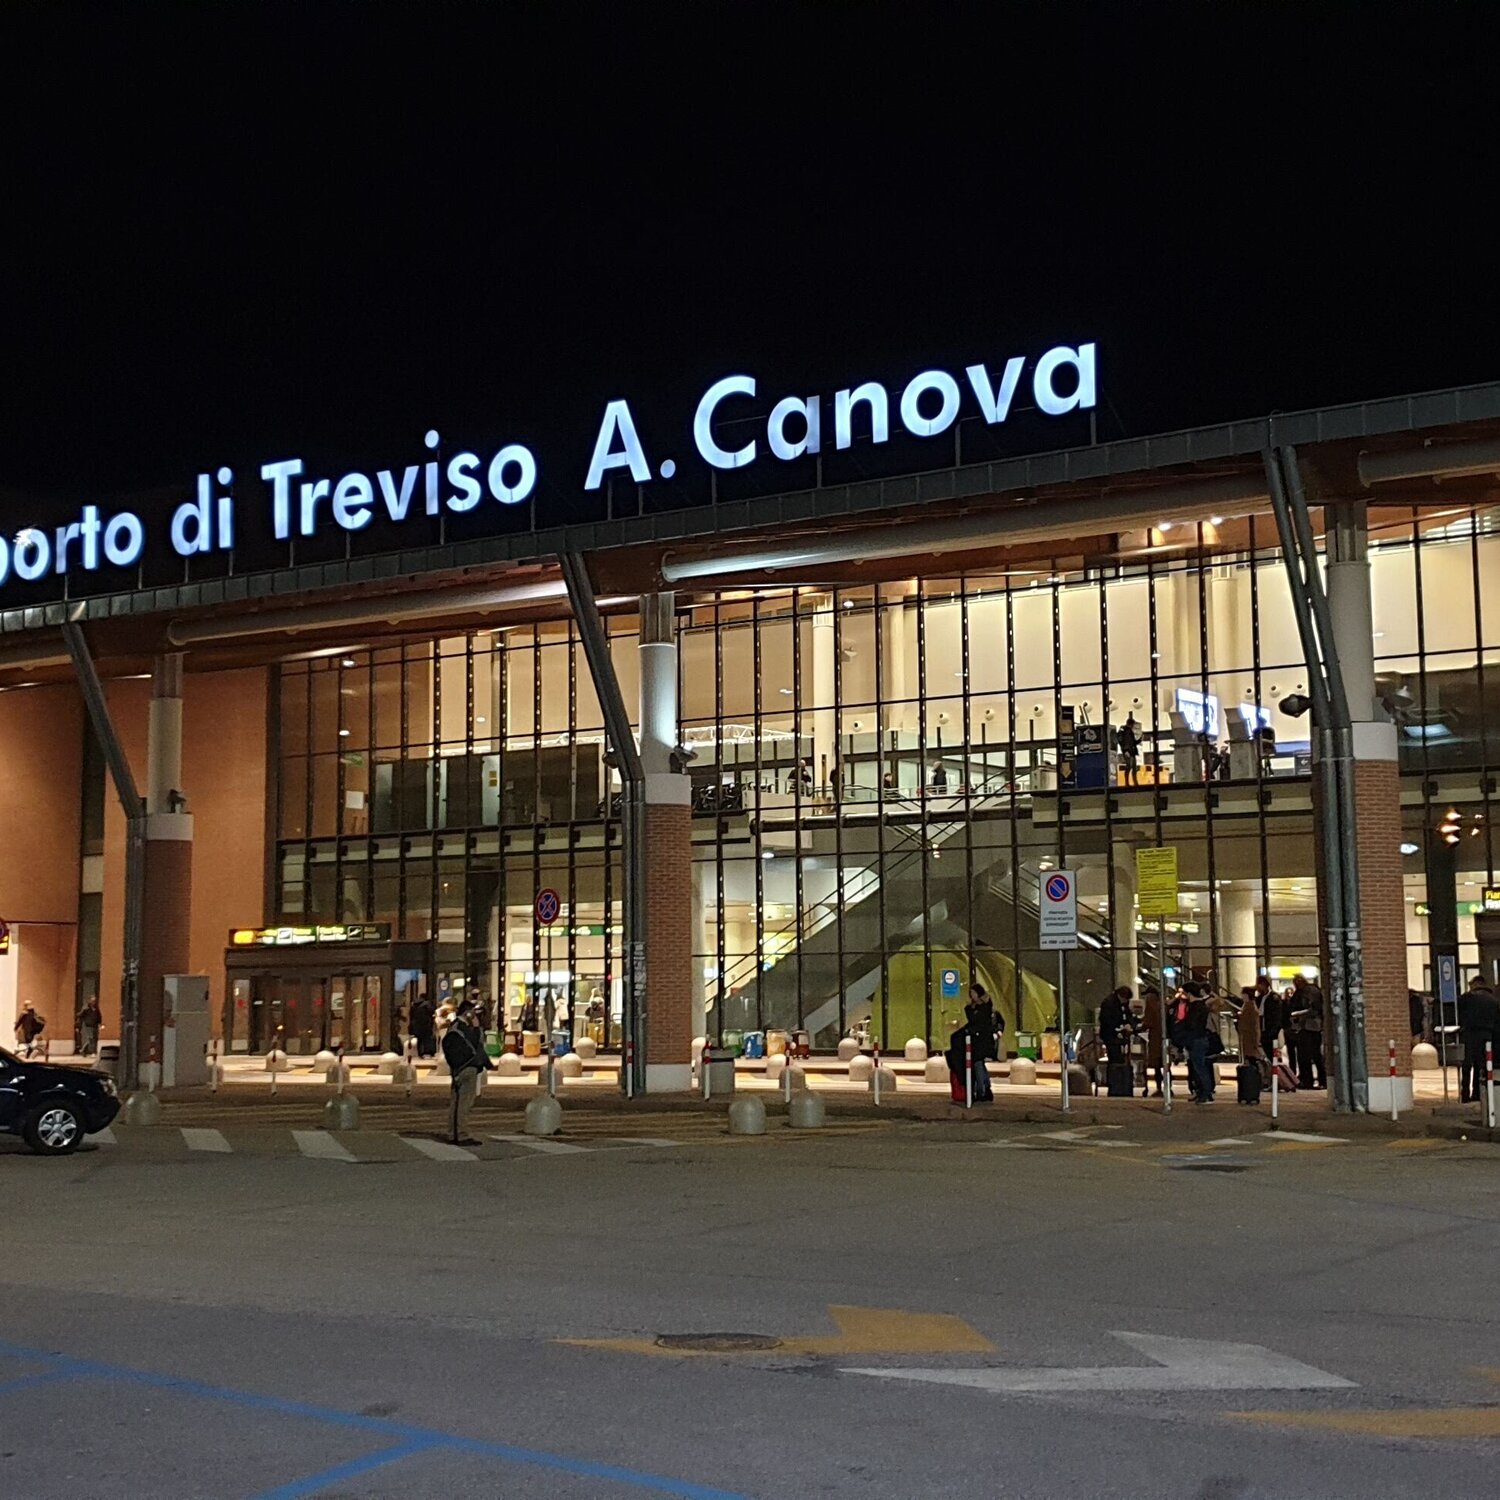 How to get from Treviso Airport to Venice and back by public transportation